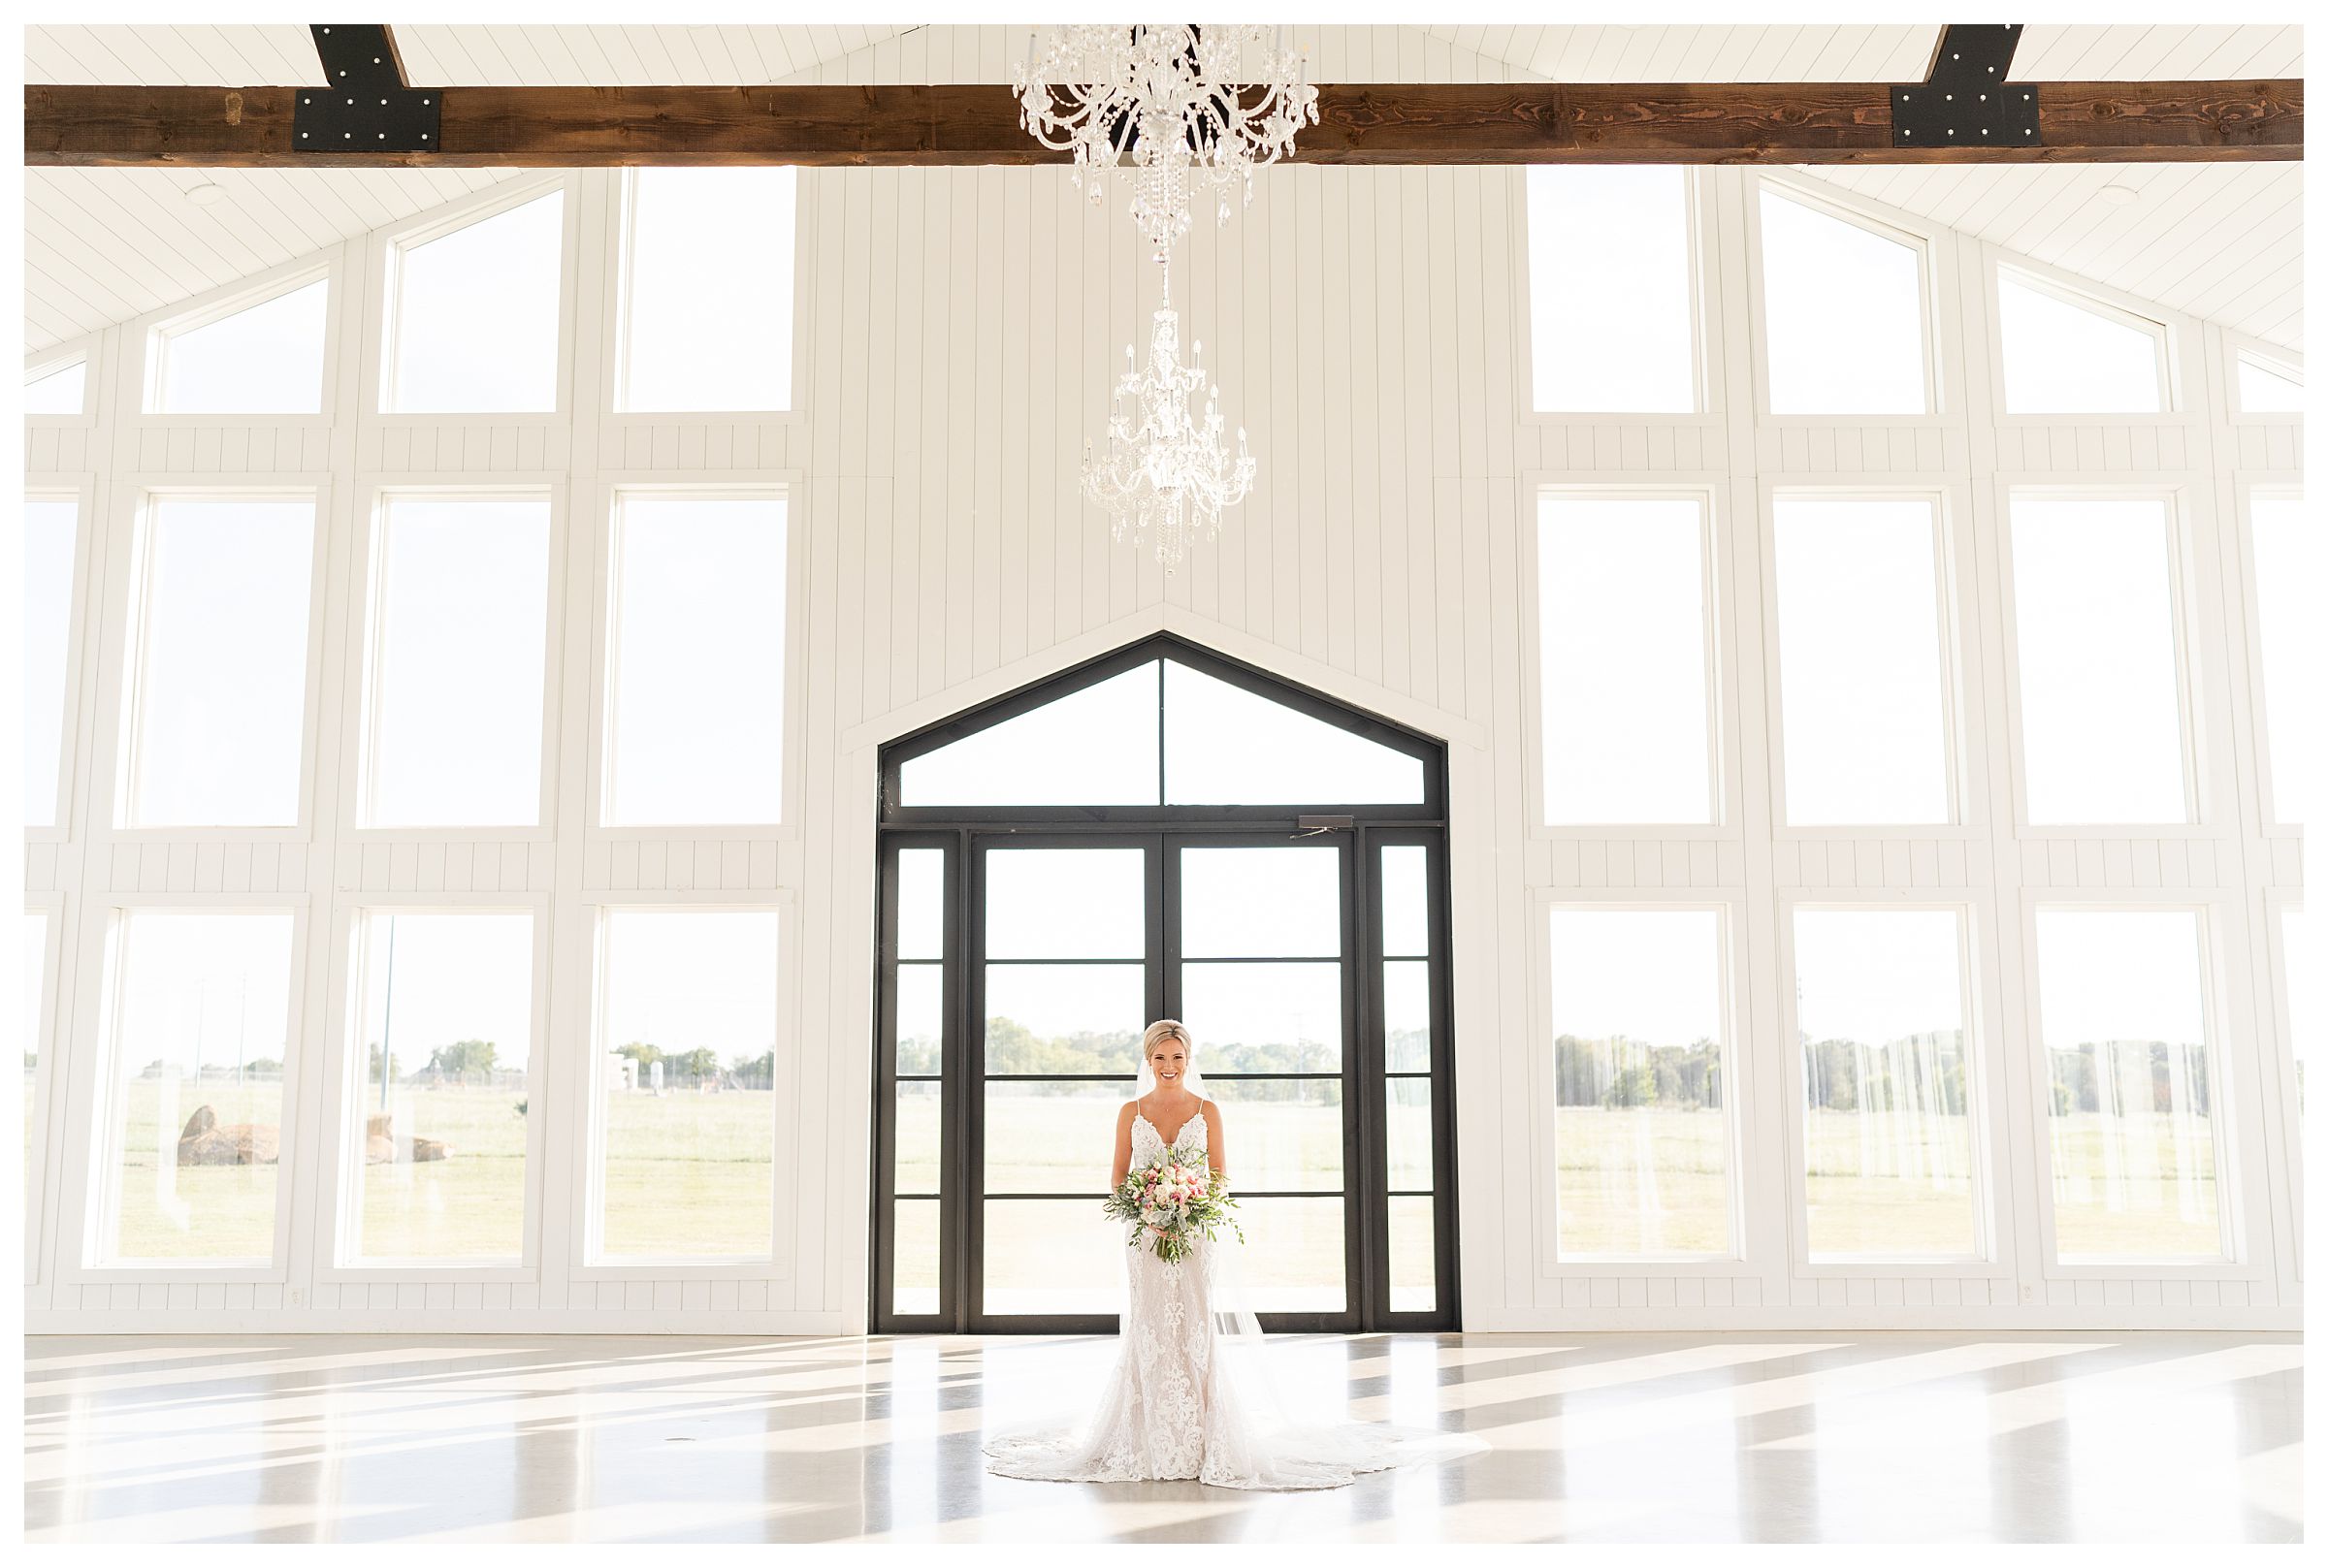 Bridal Session at The Ranch House in Texas, an all white Texas wedding venue with natural light and a wall of windows. Bride with bouquet, veil and wedding dress